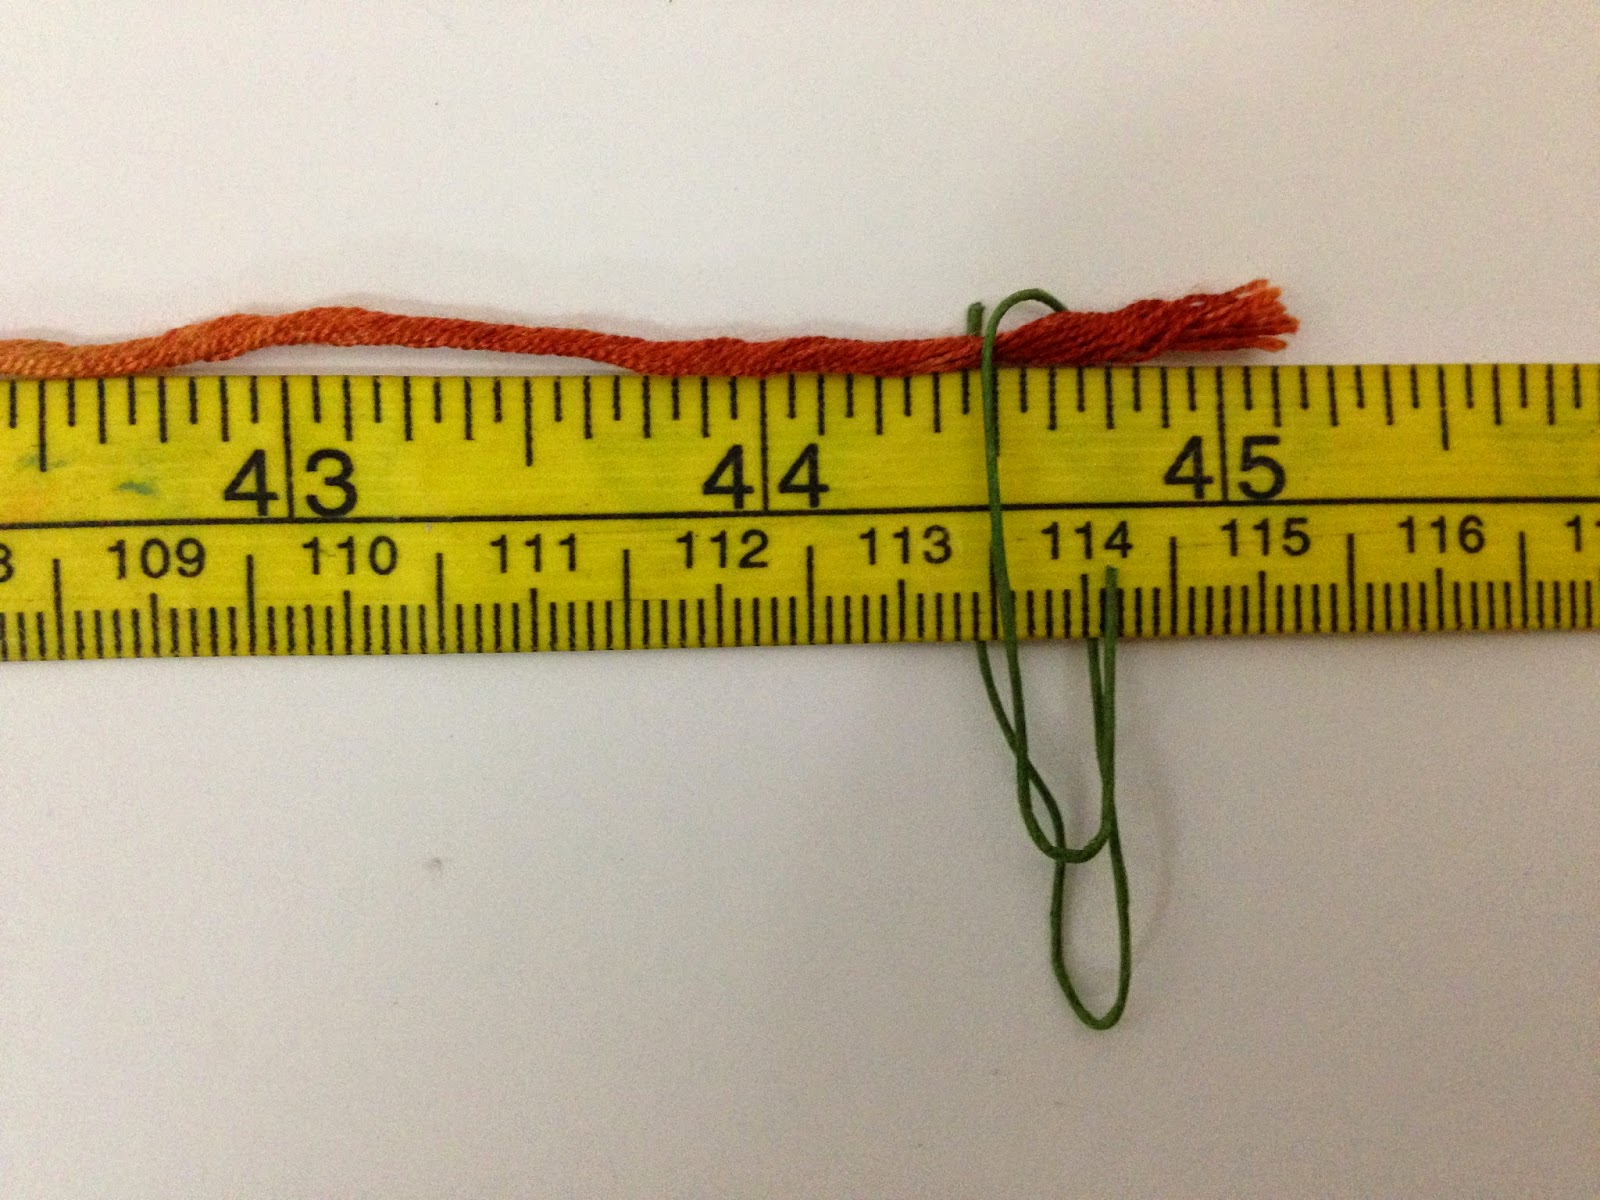 crochet rockstar: How to Calculate The Length of a Yarn the Easy Way